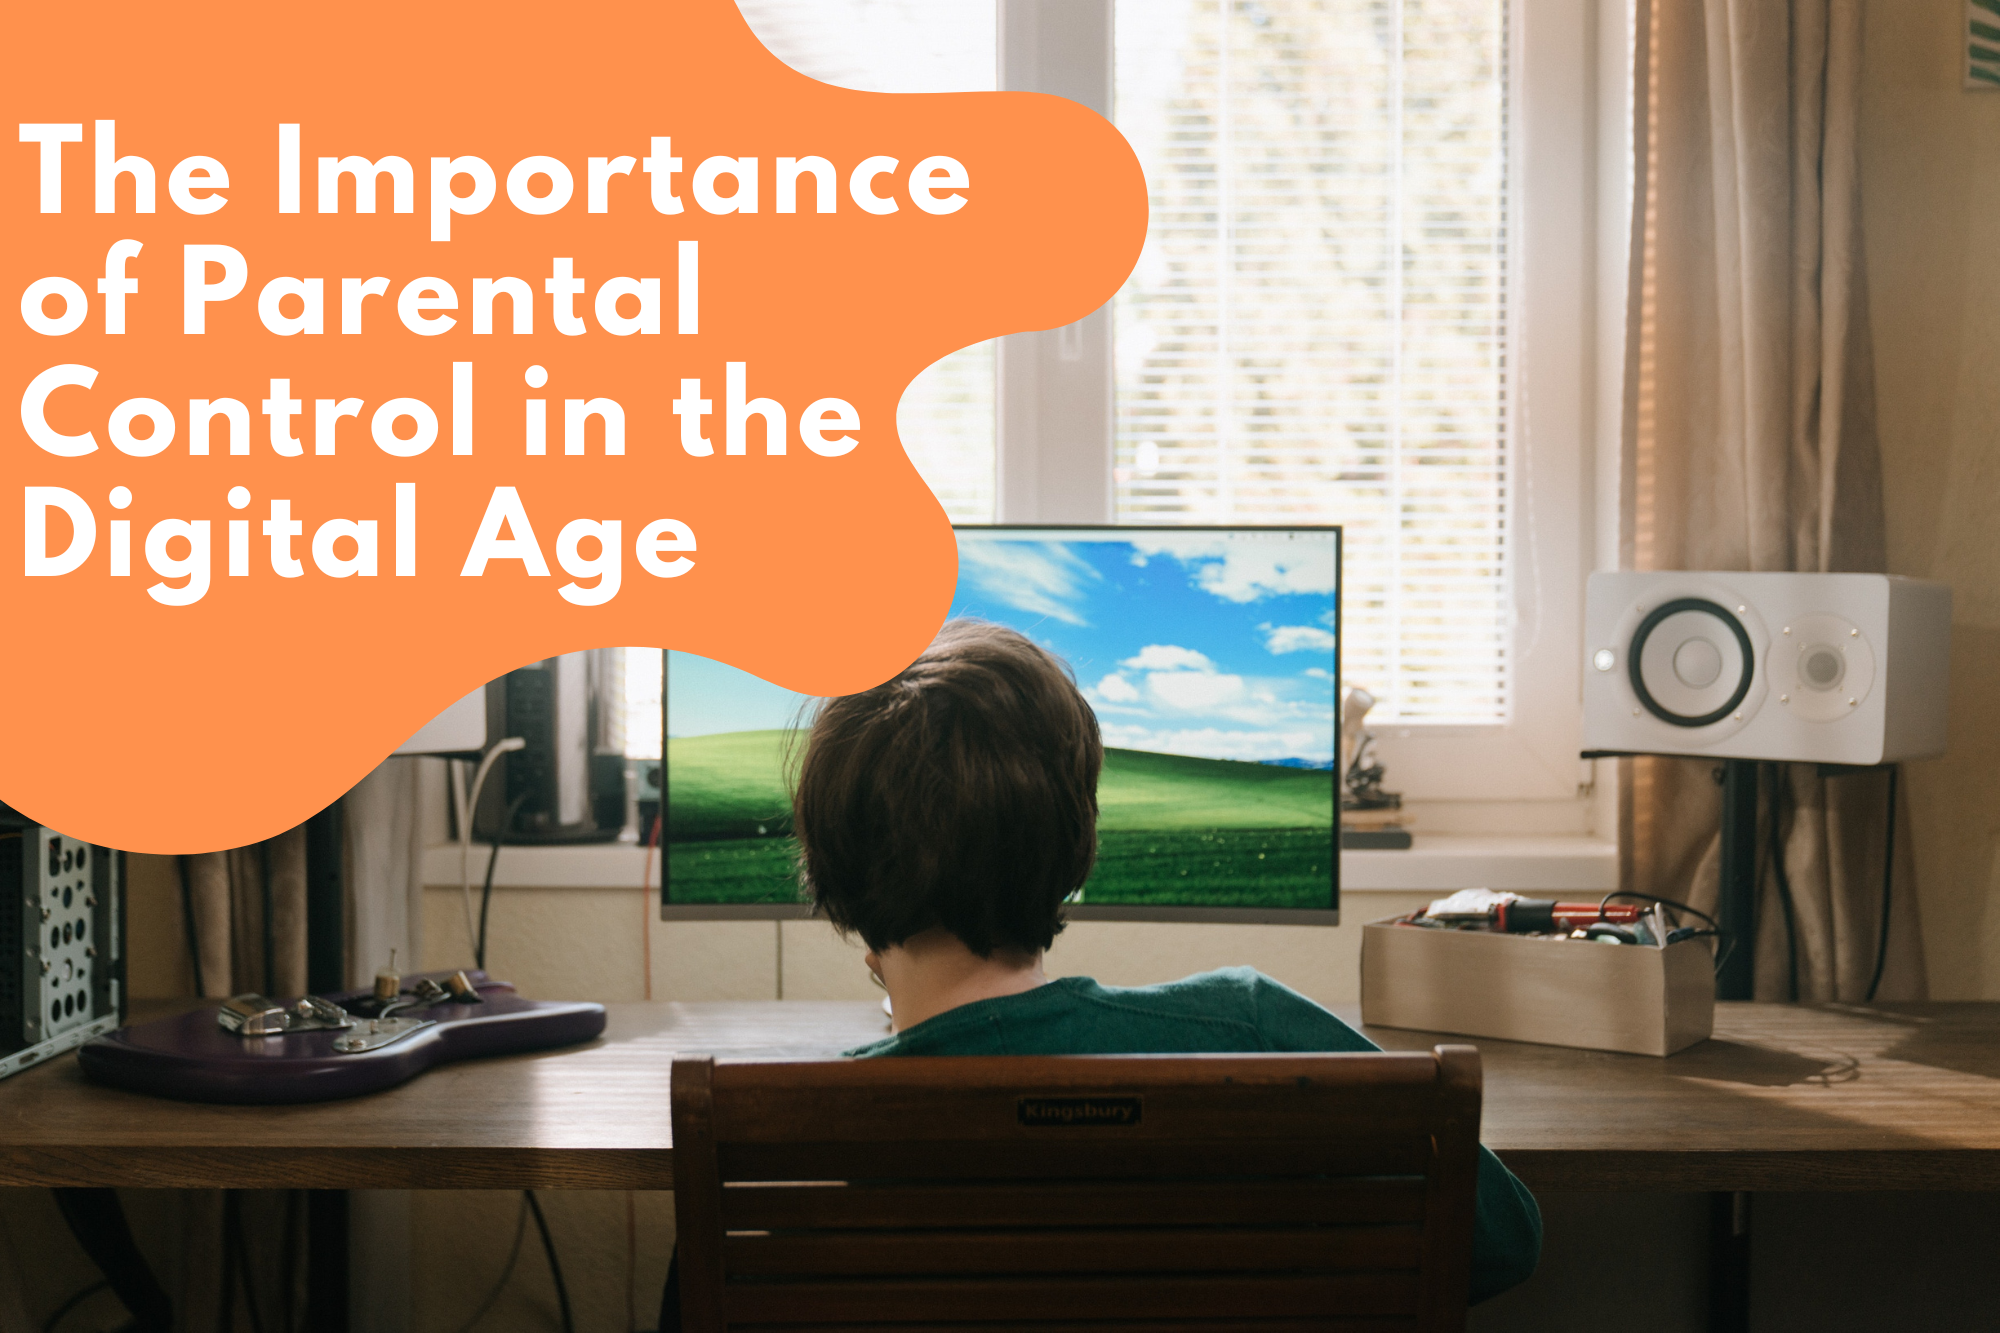 The Importance of Parental Control in the Digital Age